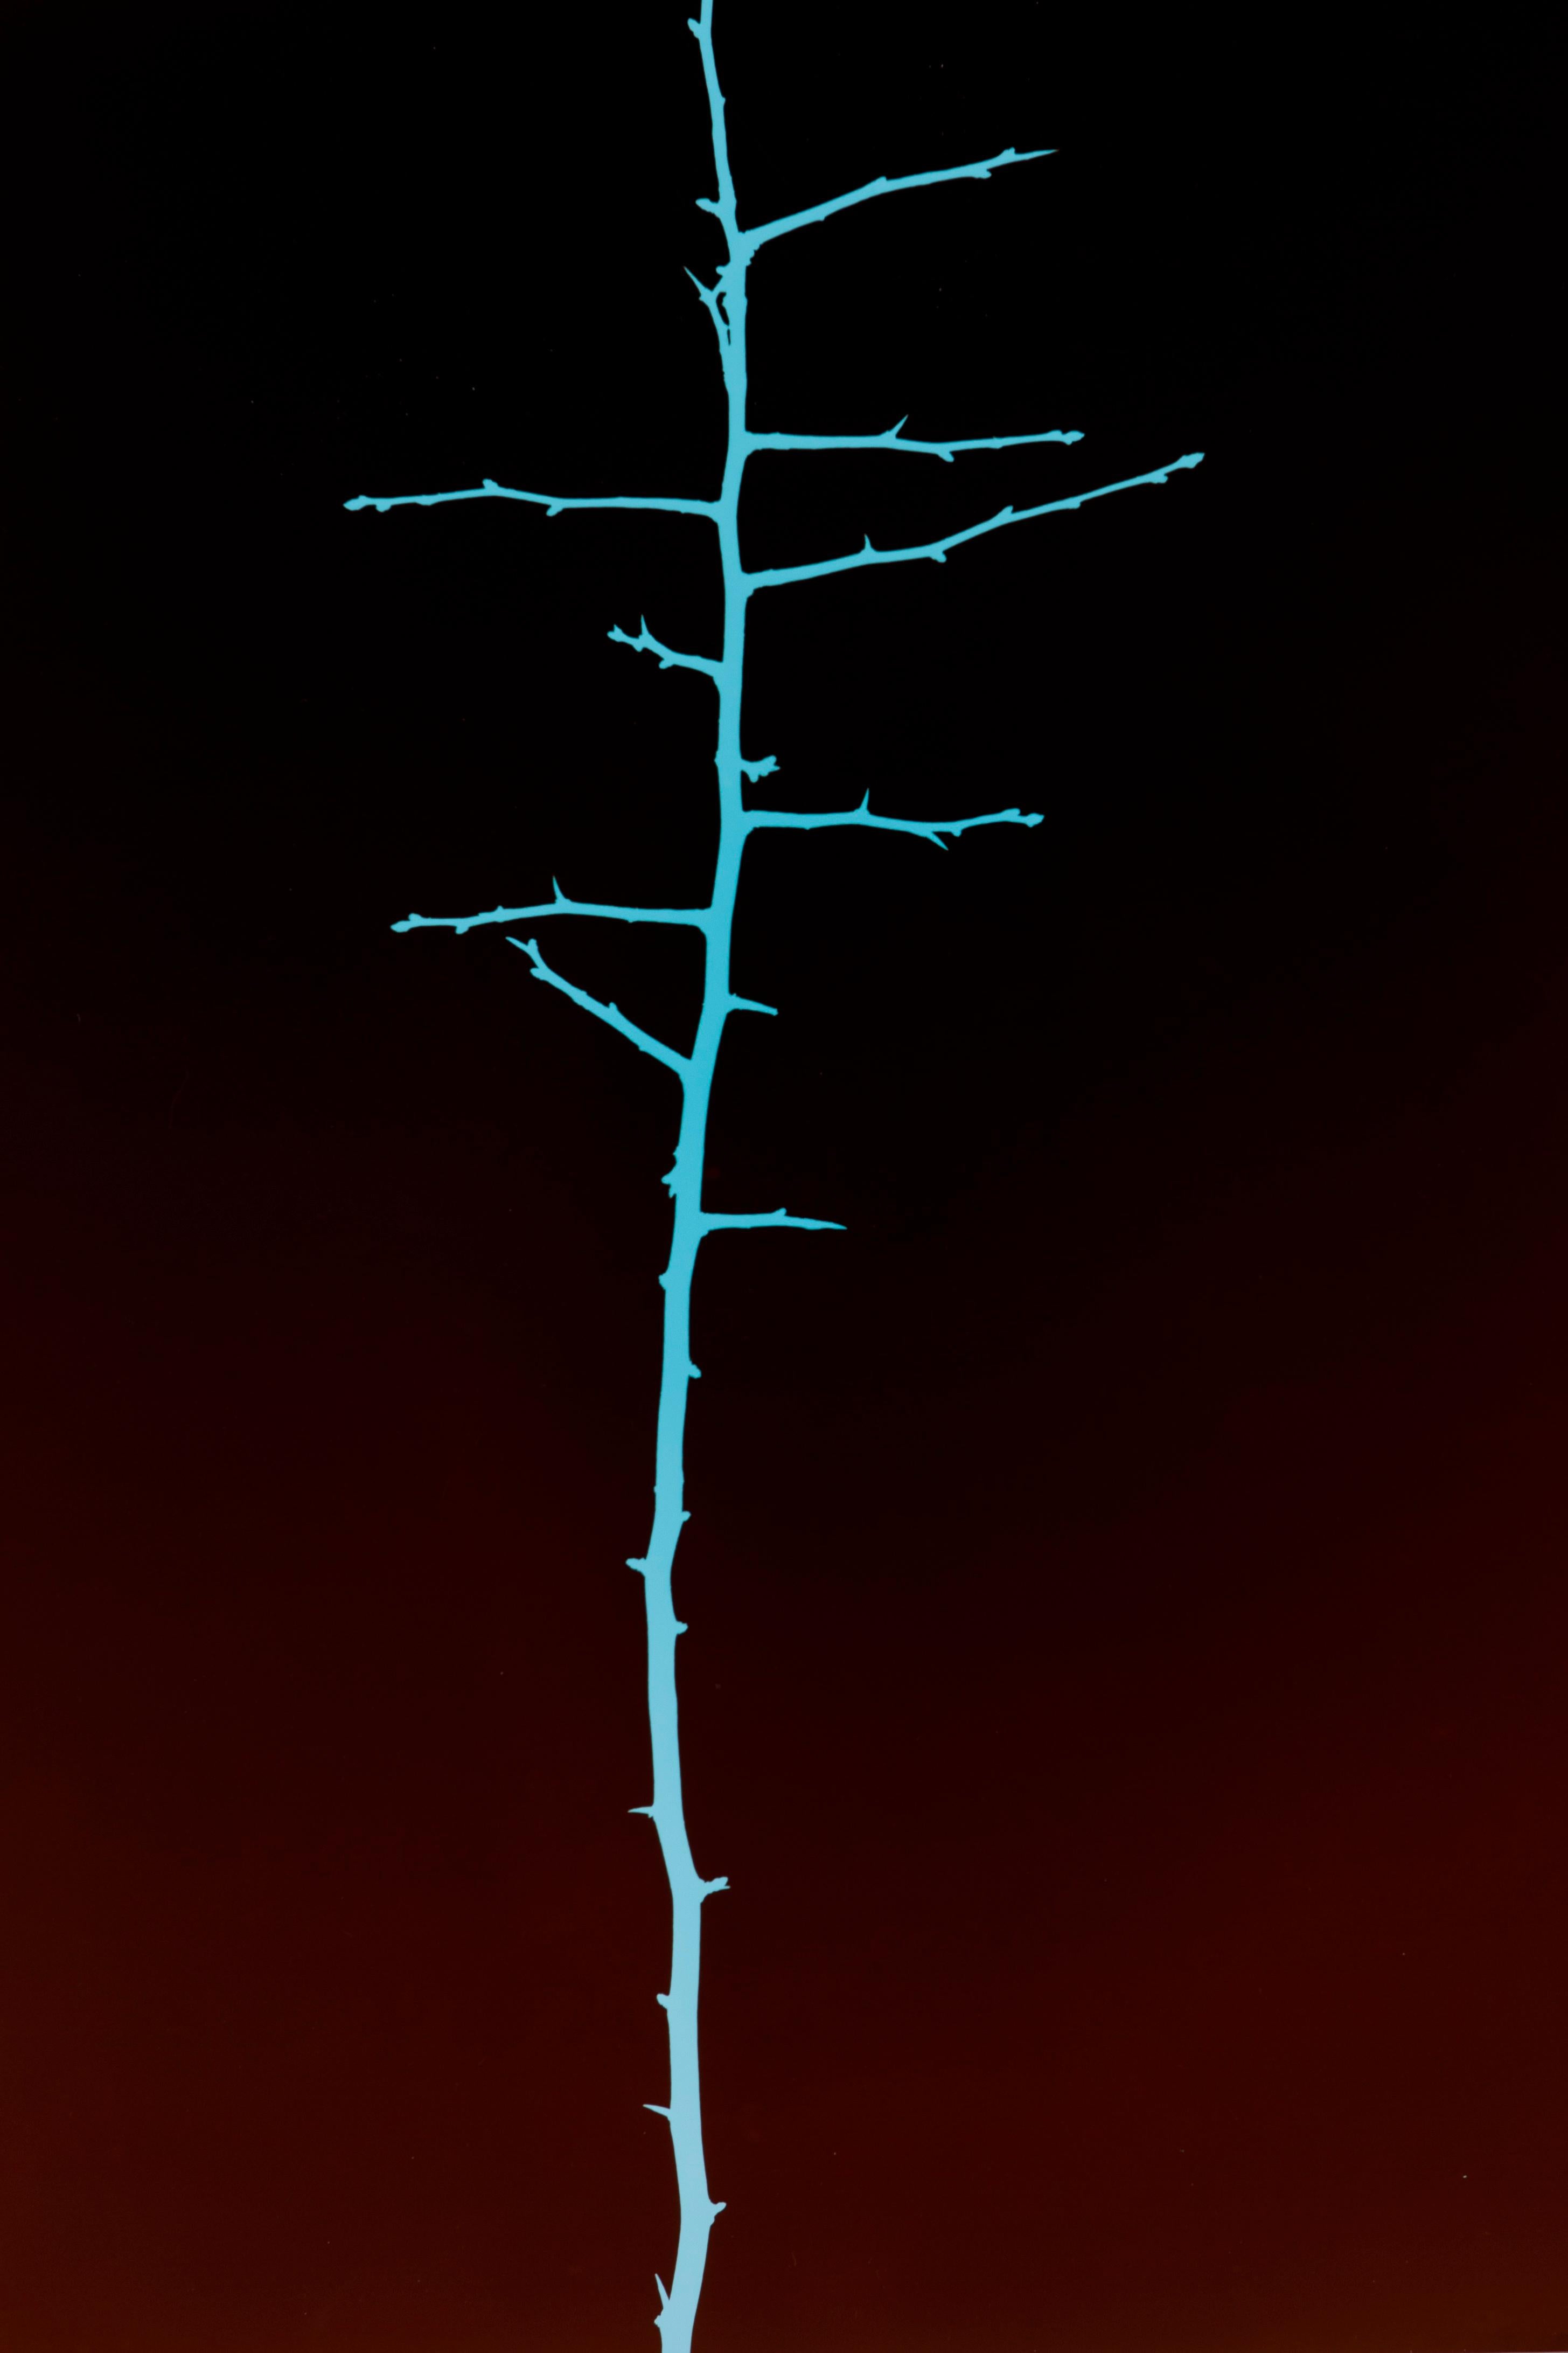 Trees (Nr. 9/2) - Black and Turquoise Blackthorn Branch Photogram